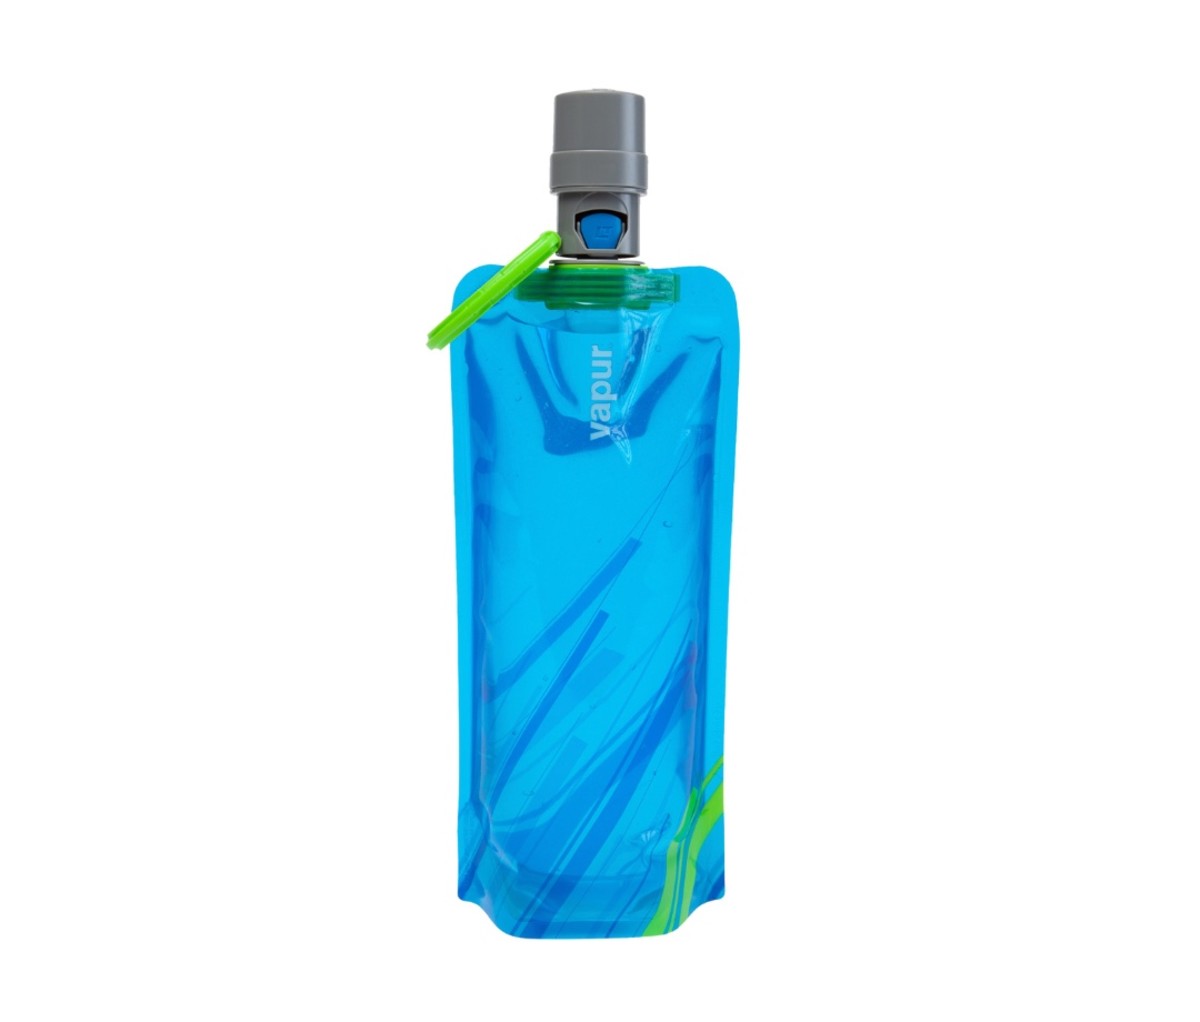 Keep your dog hydrated no matter how far away the location is with the Vapor EZ Lick Bottle.